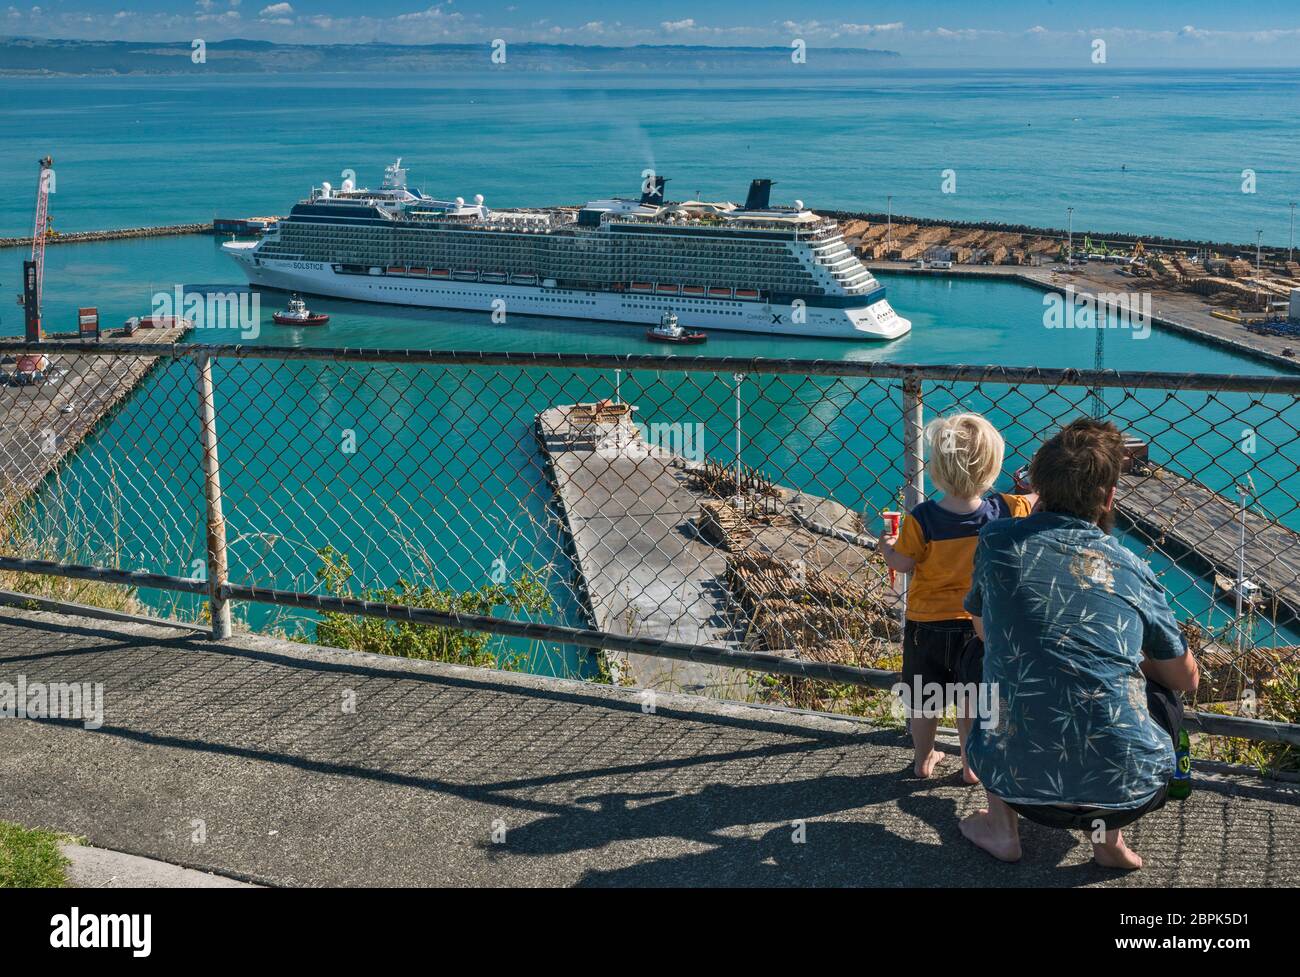 Father and his son watching Celebrity Solstice cruise ship entering Port of Napier, Hawke's Bay Region, North Island, New Zealand Stock Photo